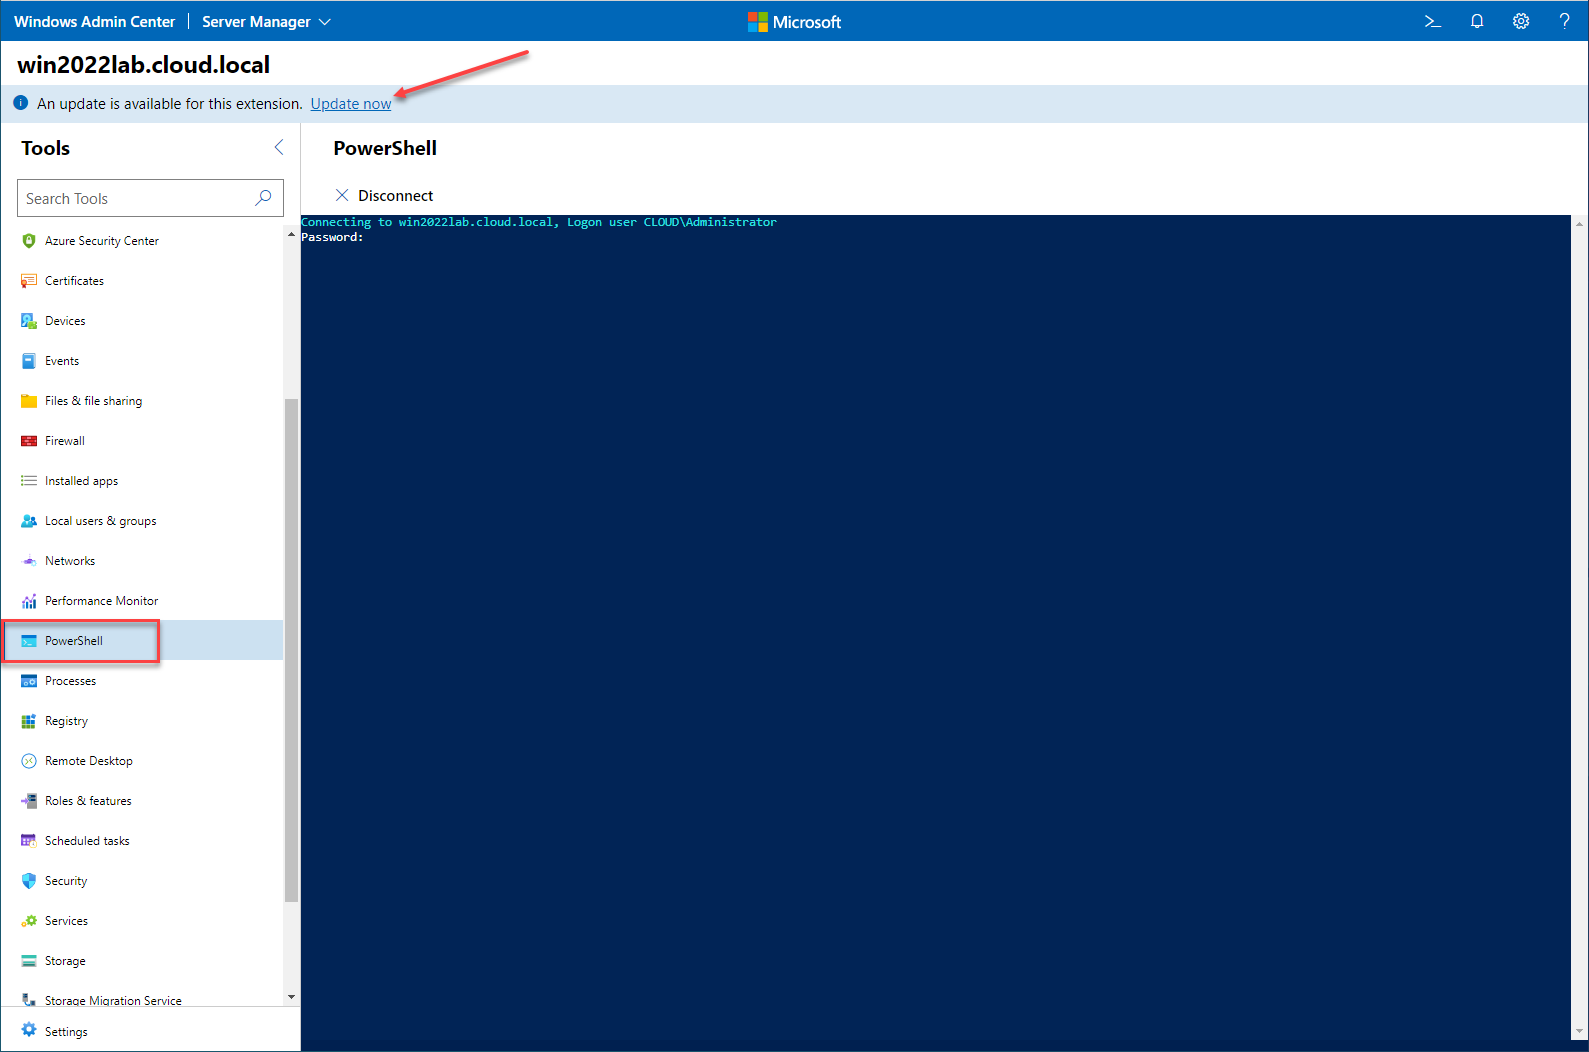 Access a remote PowerShell prompt with Windows Admin Center